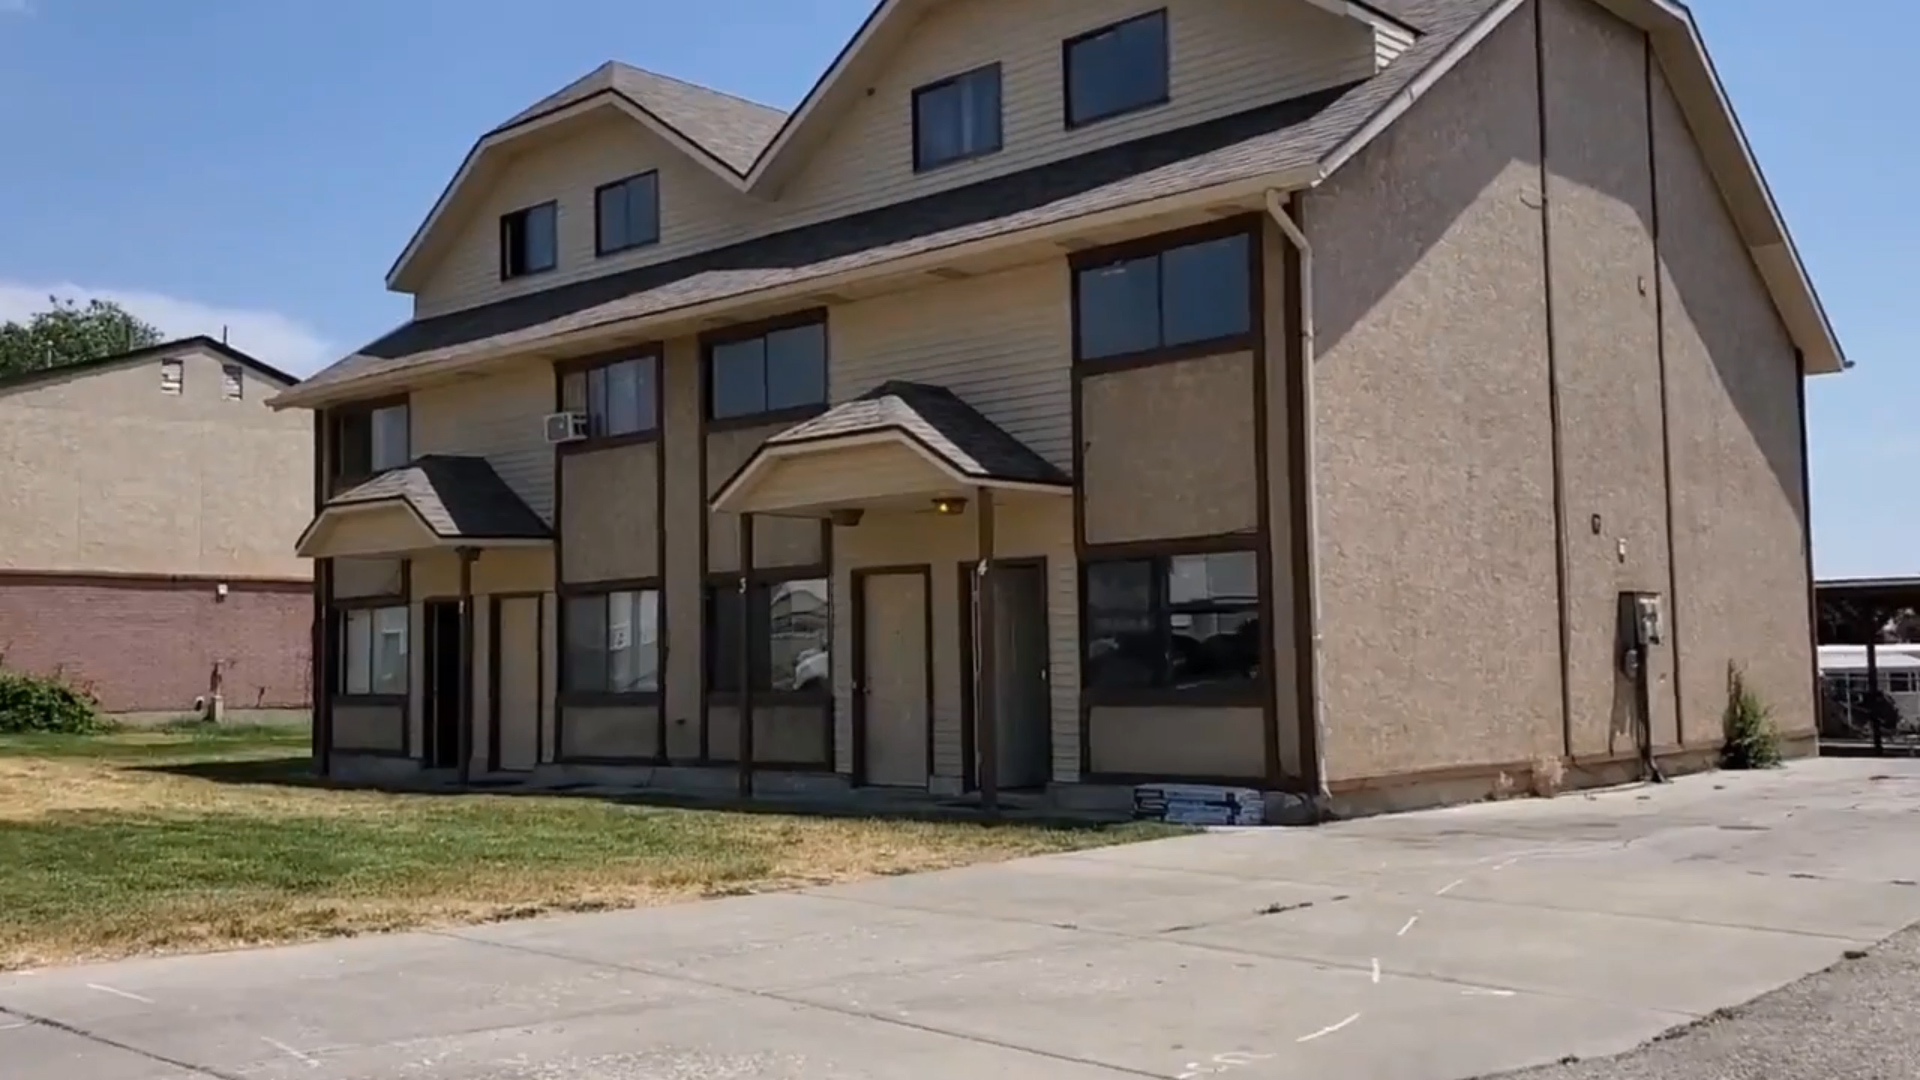 VIDEO: Layton Fourplex Turnaround – Ep. 2 – Before and After